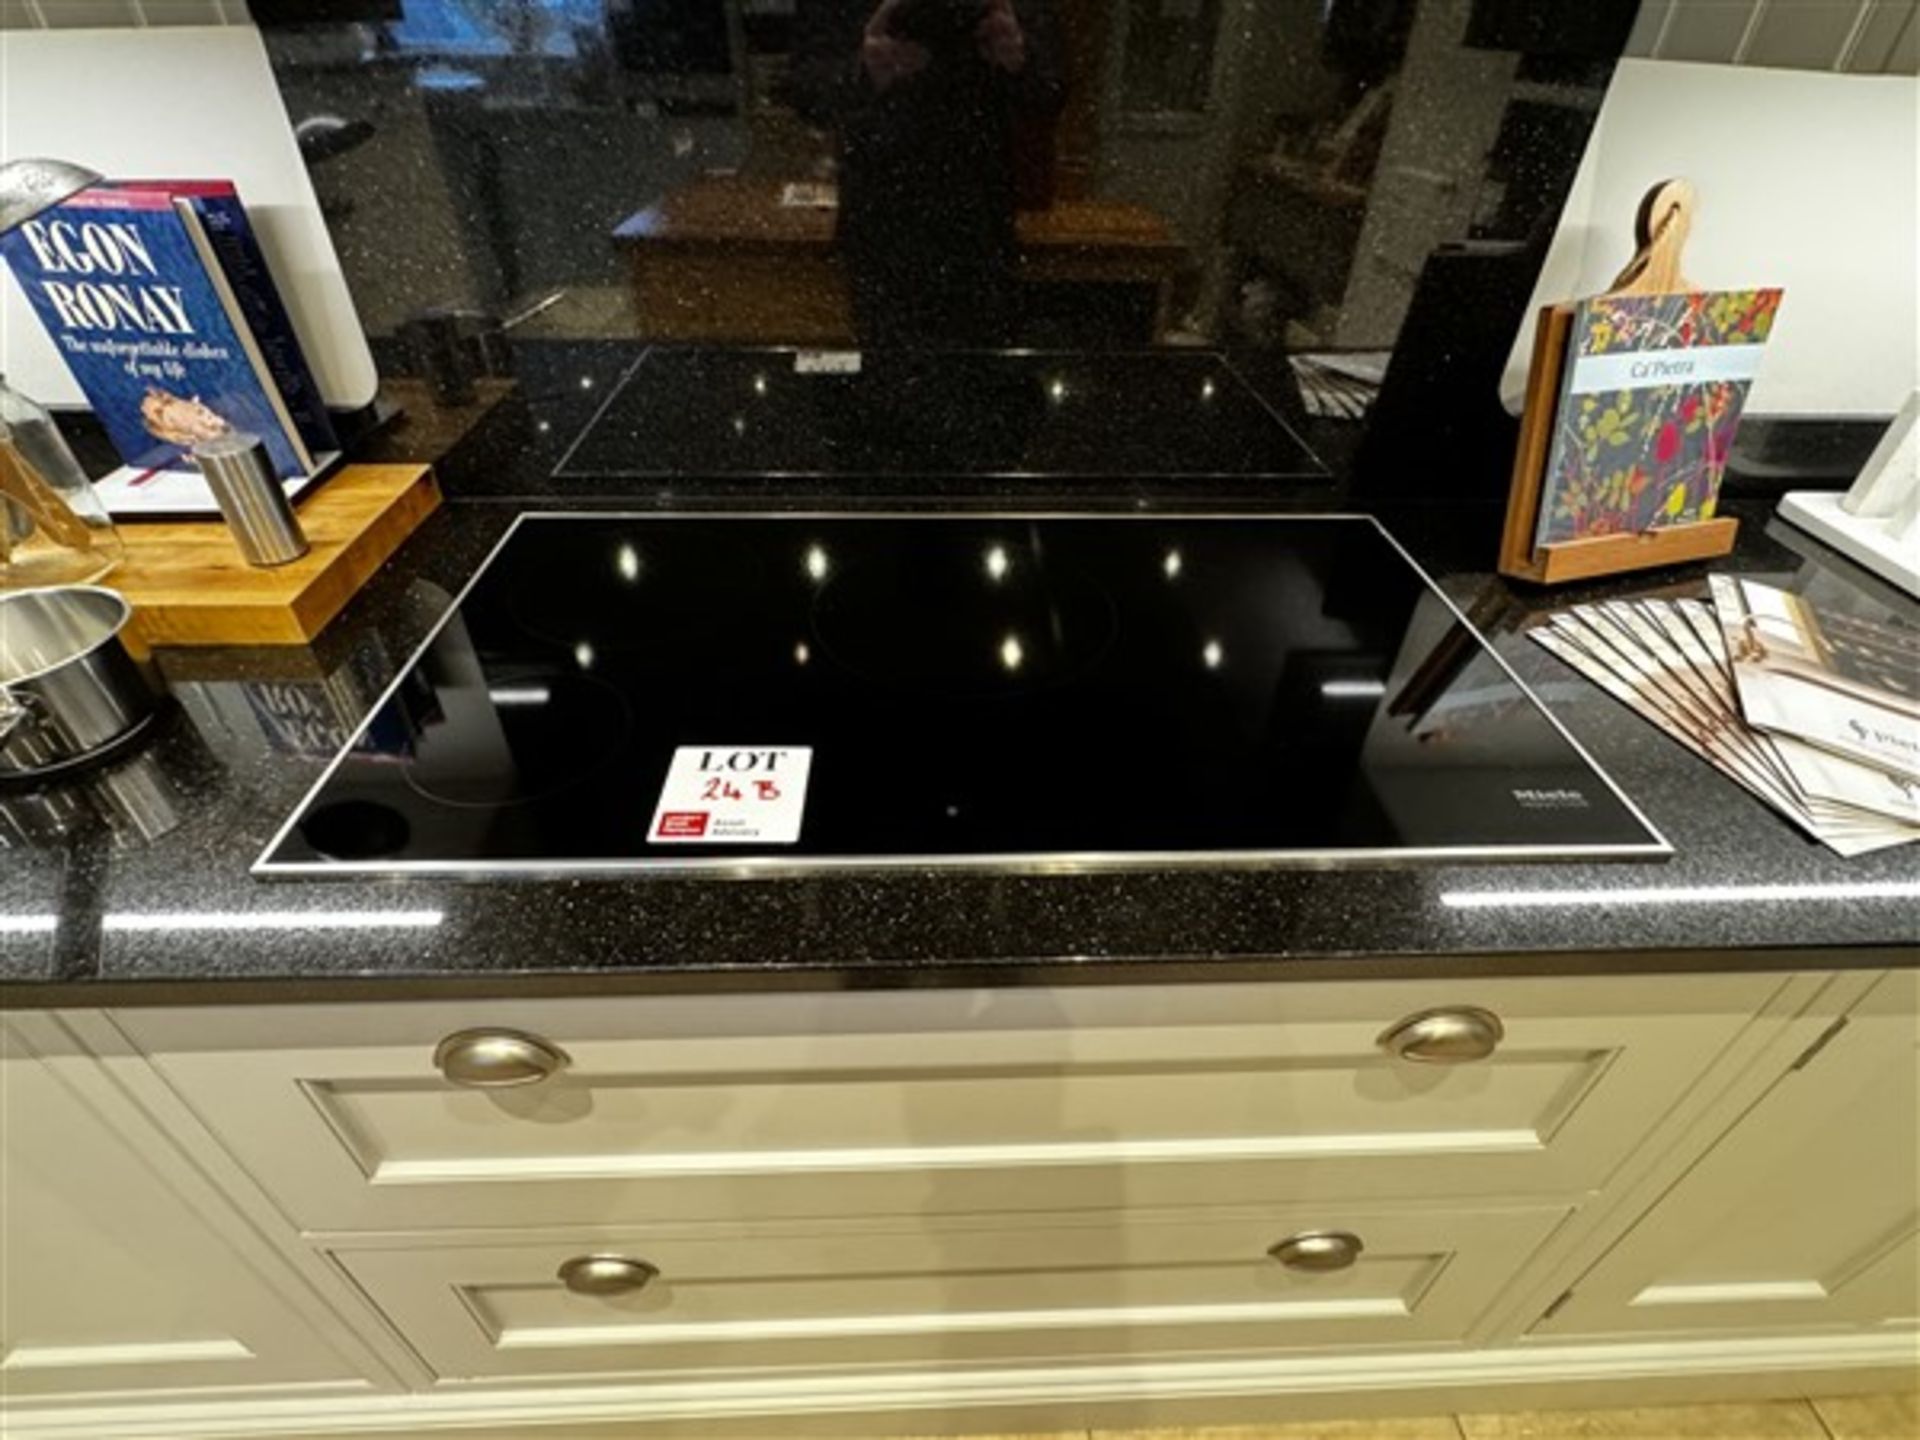 Miele4-ring induction hob, 940mm x 530mm Please note – Acceptance of the final highest bid on this